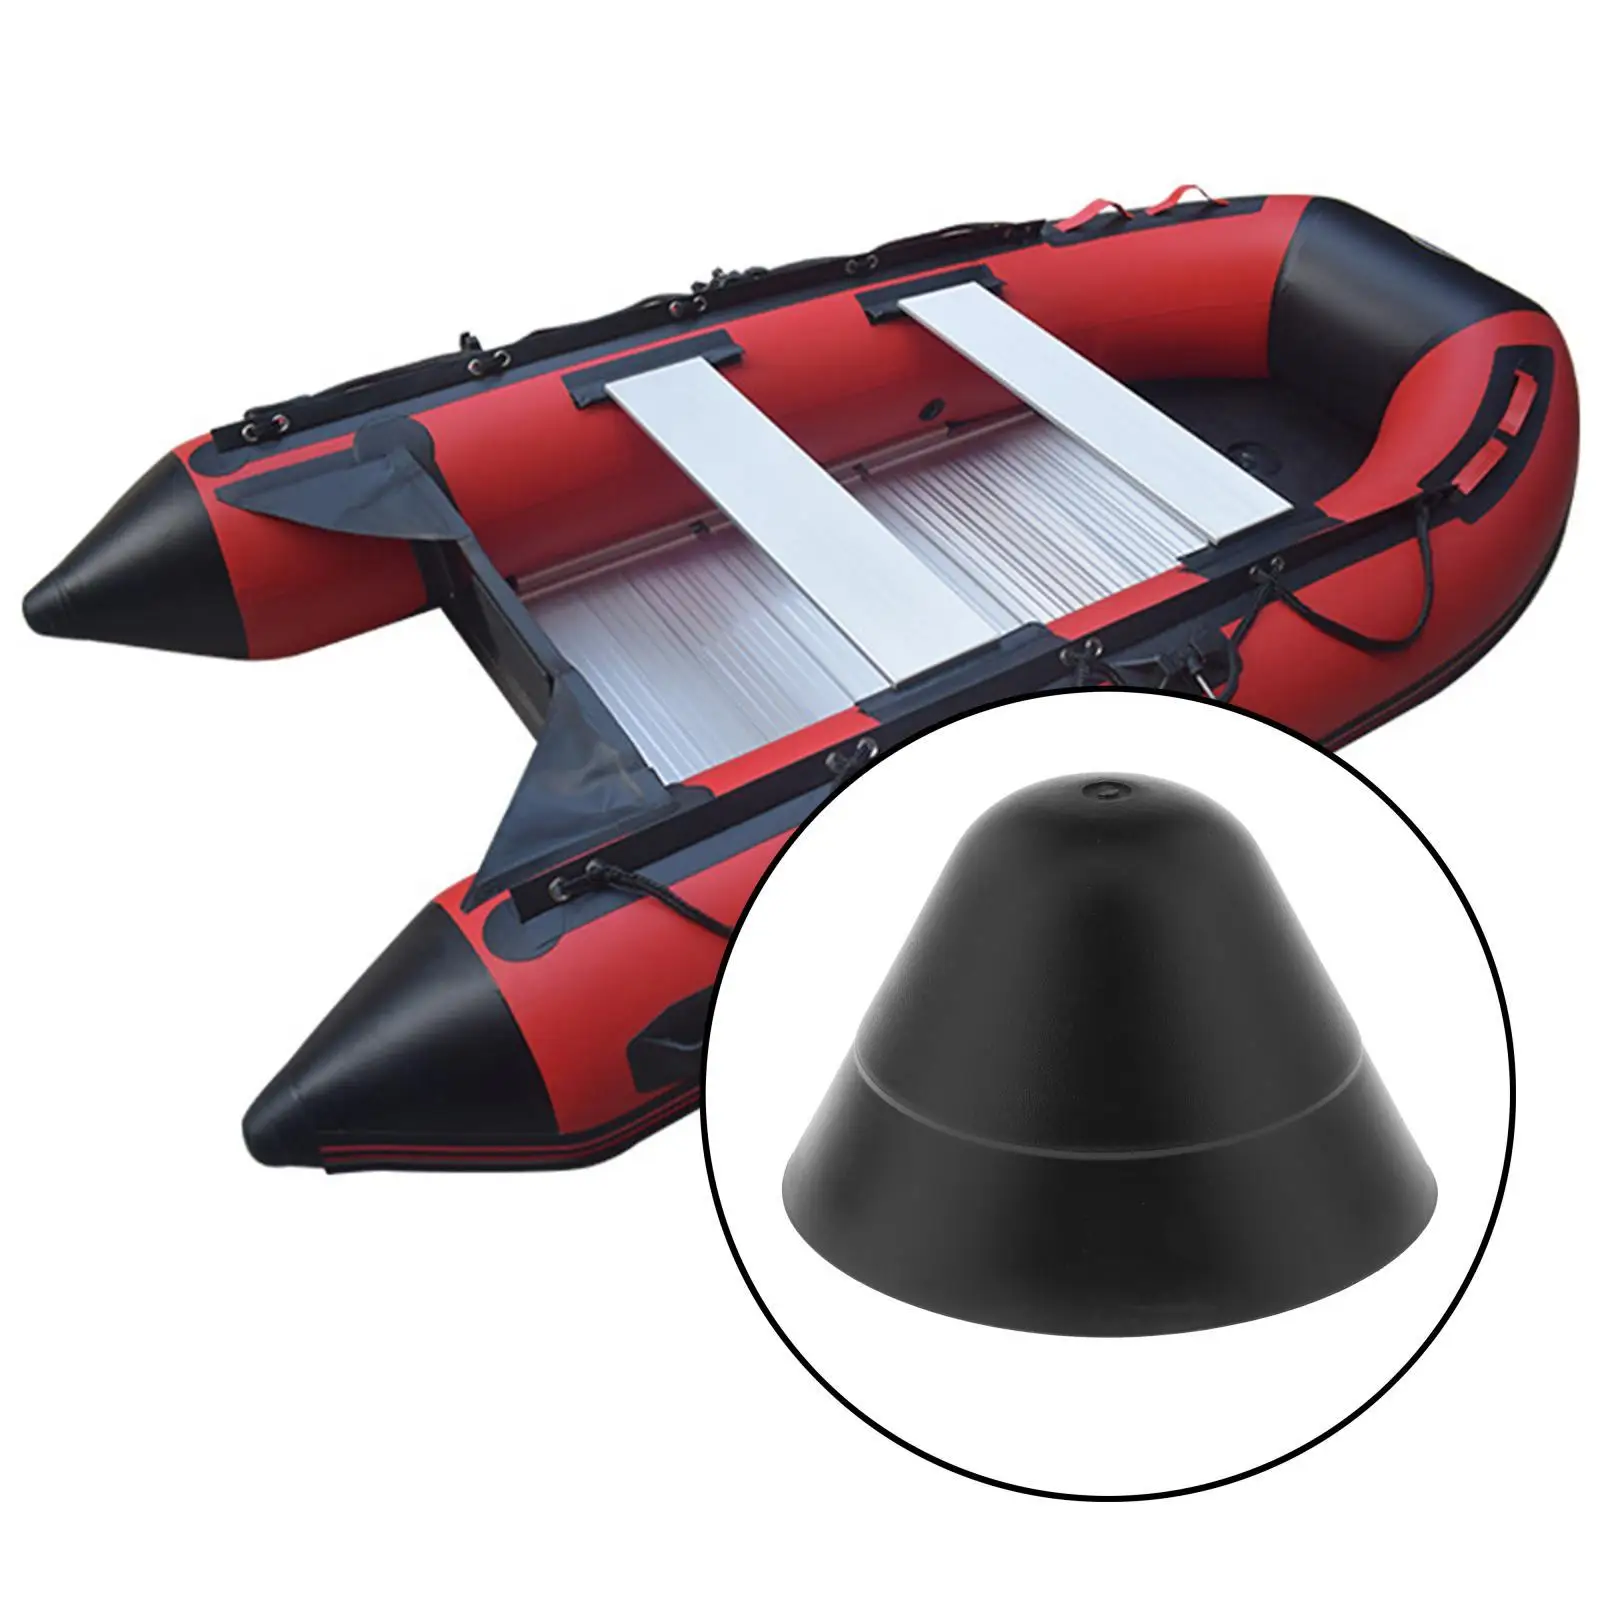 Boat Kayak Collision Head Replace Protector Head Impact Protect 90 Degree